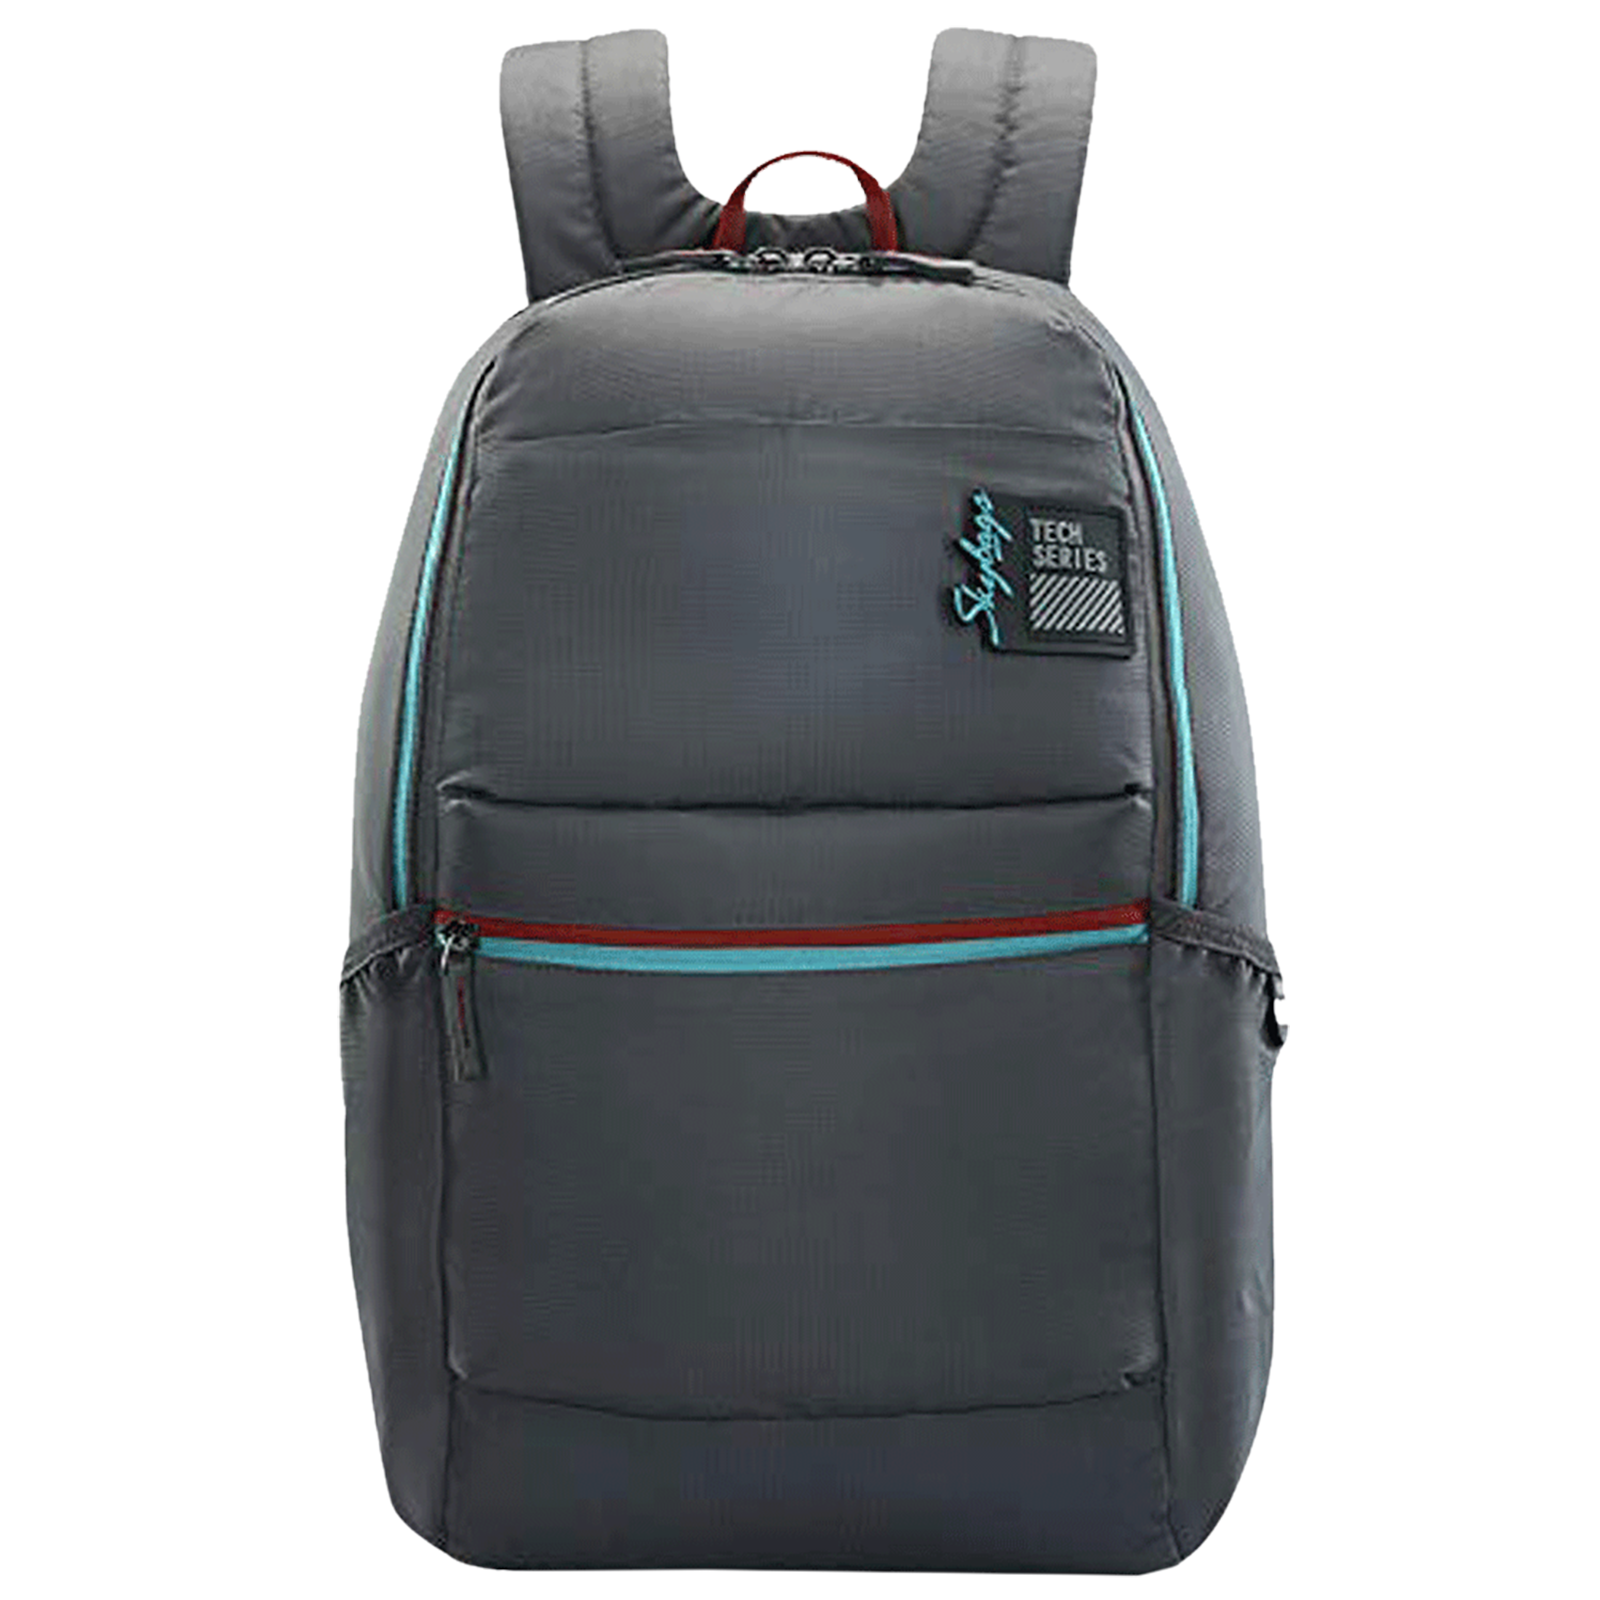 Skybags Yolo Polyester Laptop Backpack for 15.6 Inch Laptop (25 L, Water Resistant, Grey)_1